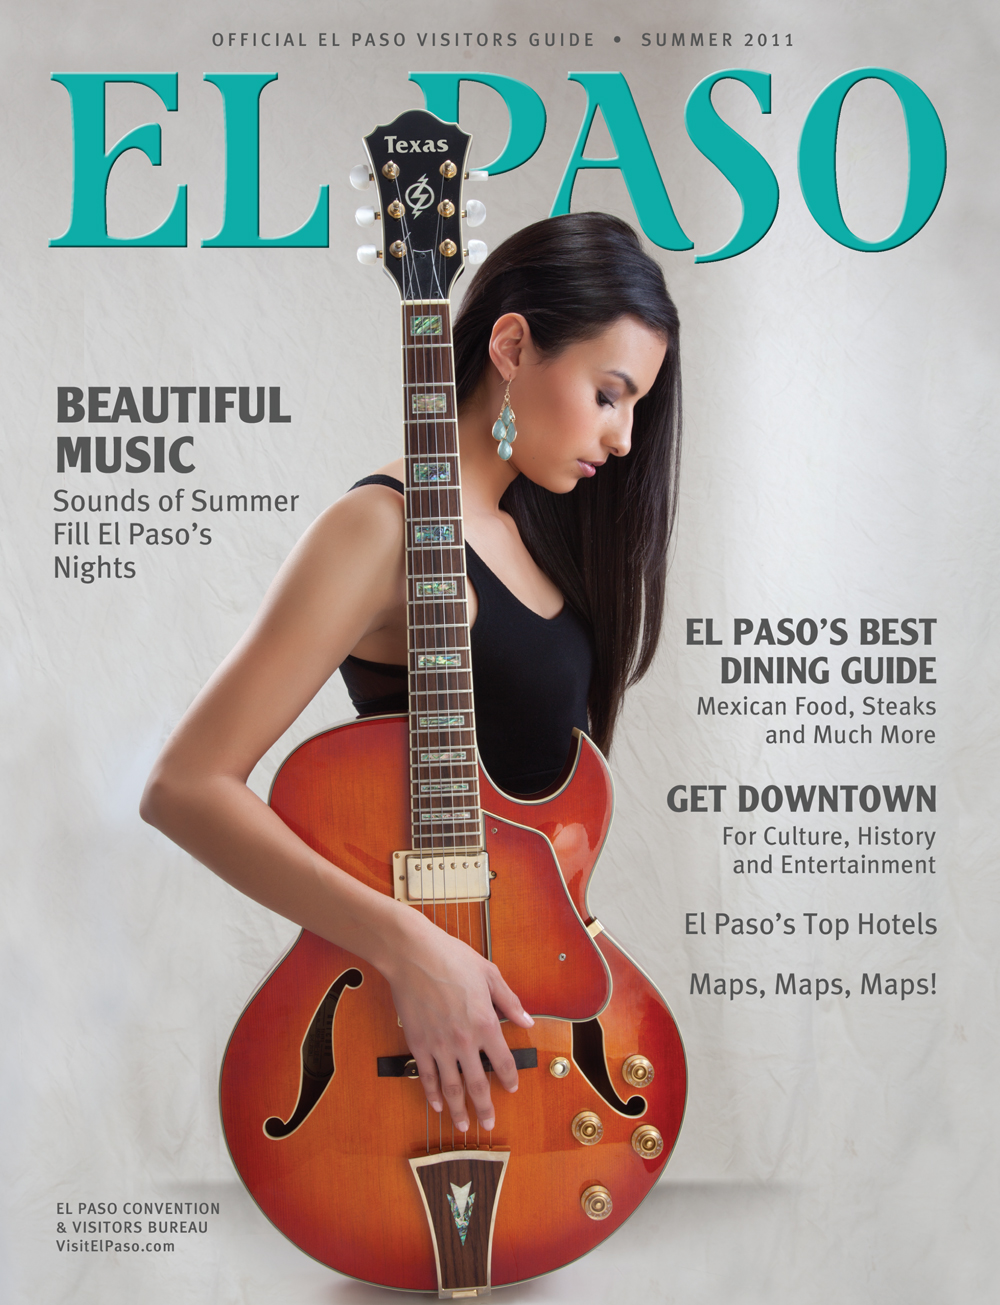     The Official El Paso Visitors Guide had a great run from 1998 through 2015 where our 3-person team (Don Baumgardt-publisher, Pam Murray-editor, Jud Burgess-designer) designed and produced over 50 magazines touting our fair city’s positives while 